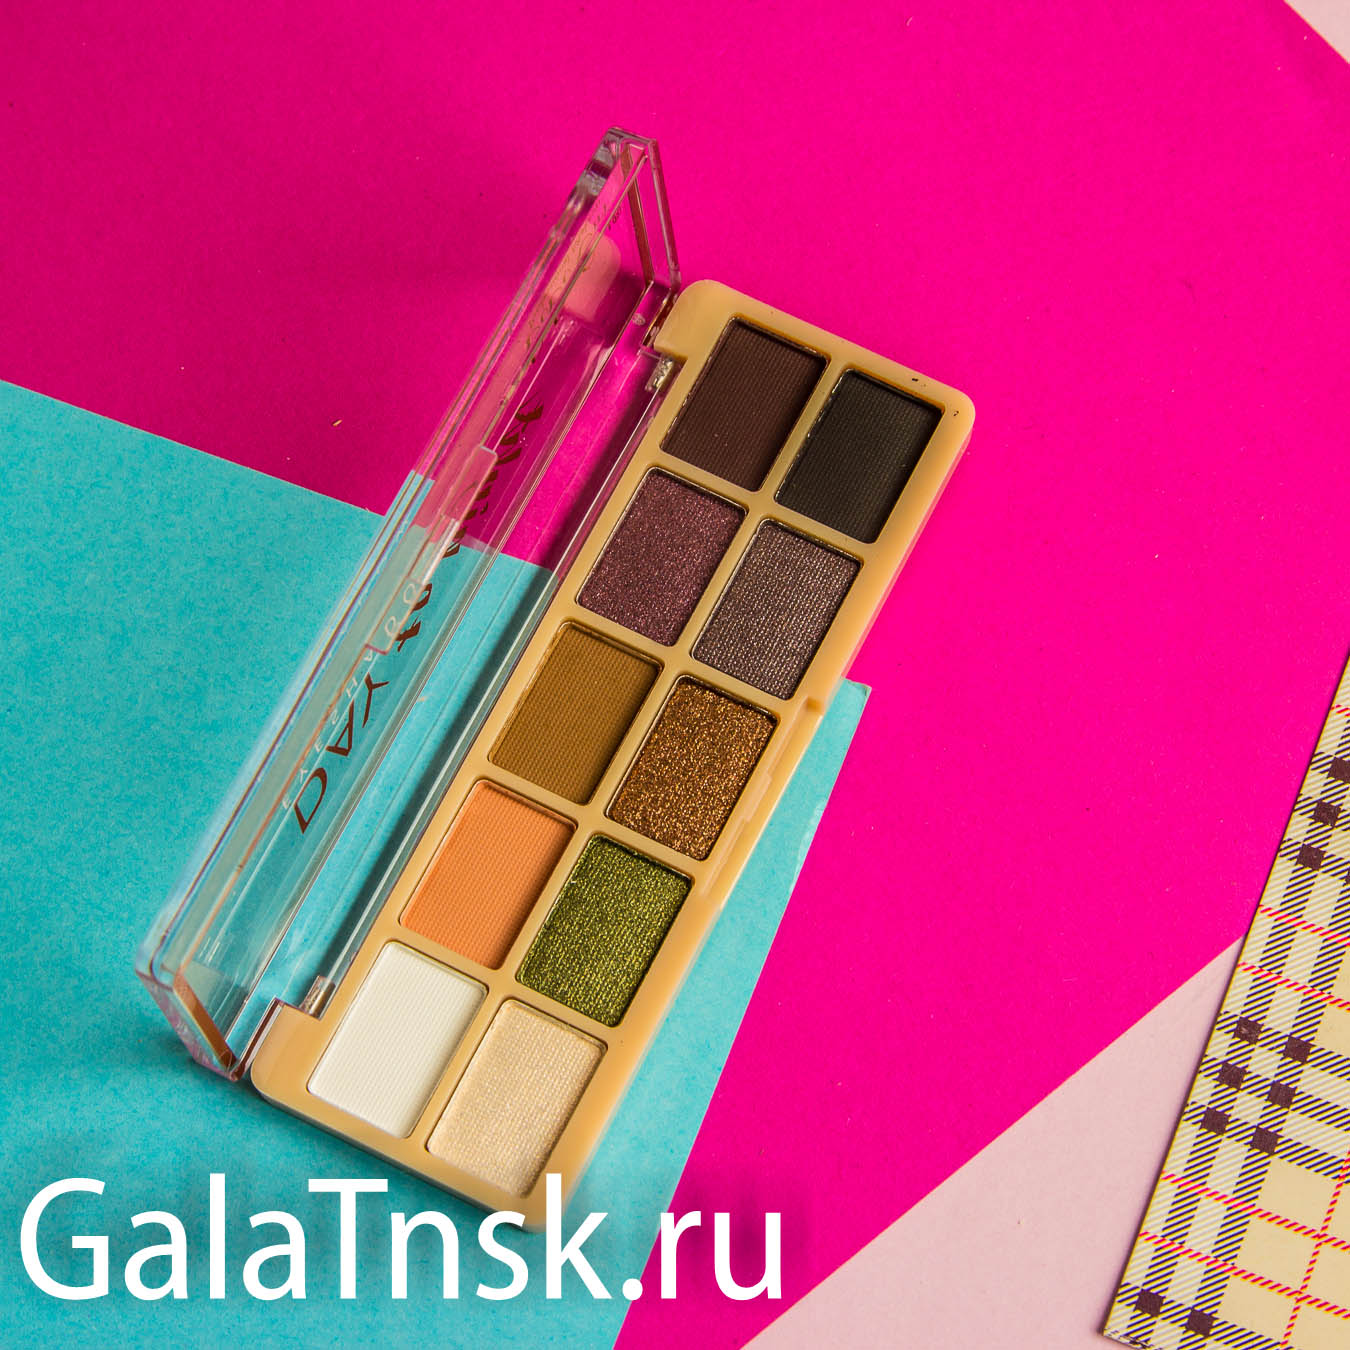 DO DO GIPL Тени DAY TO NIHT 10colors D3182 03